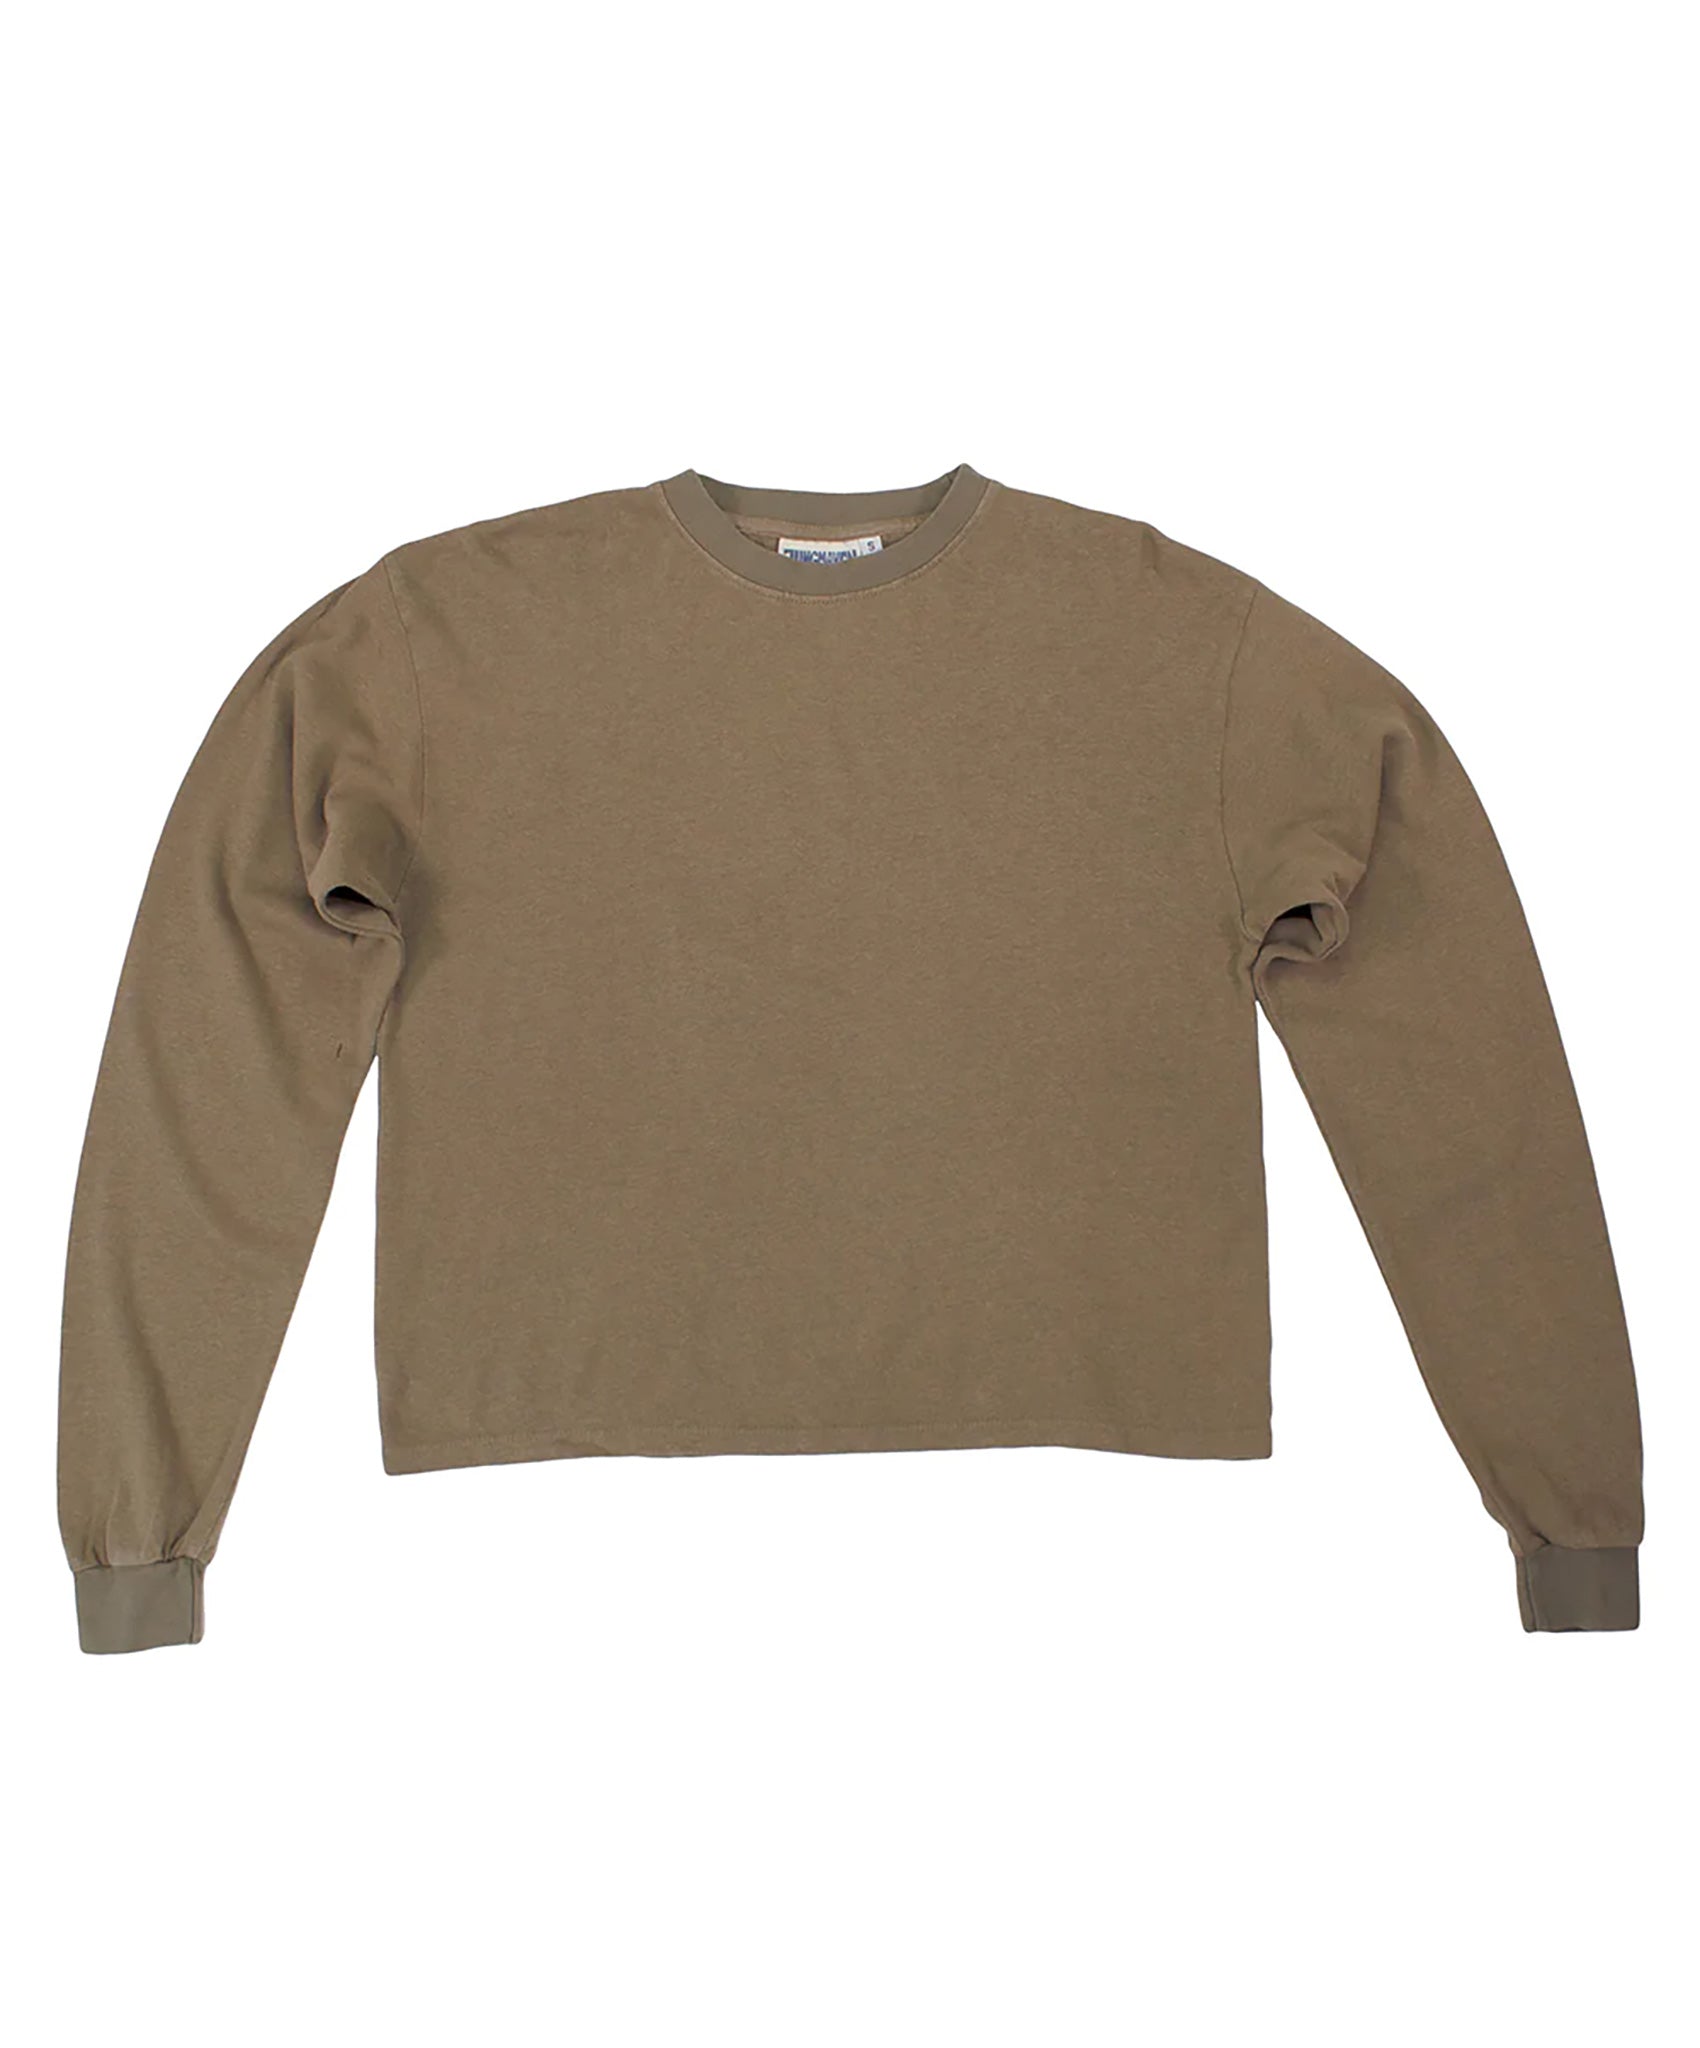 Jungmaven-Cropped Long Sleeve Tee // Coyote